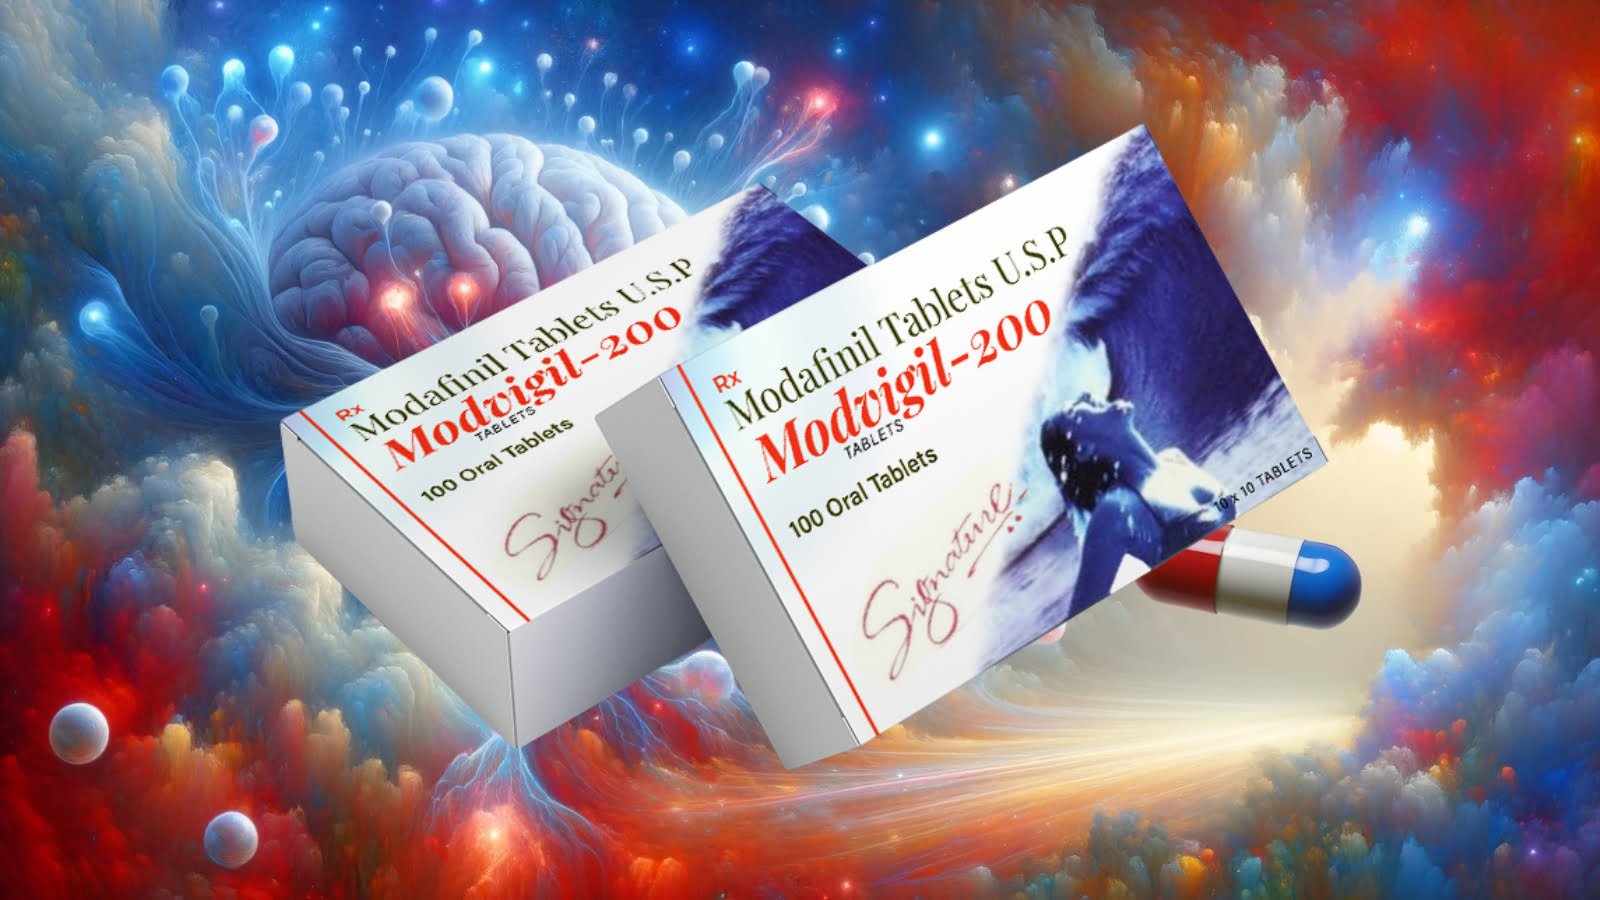 A review of Modvigil's nootropic benefits, uses, dosage, and side effects in enhancing neural connections.